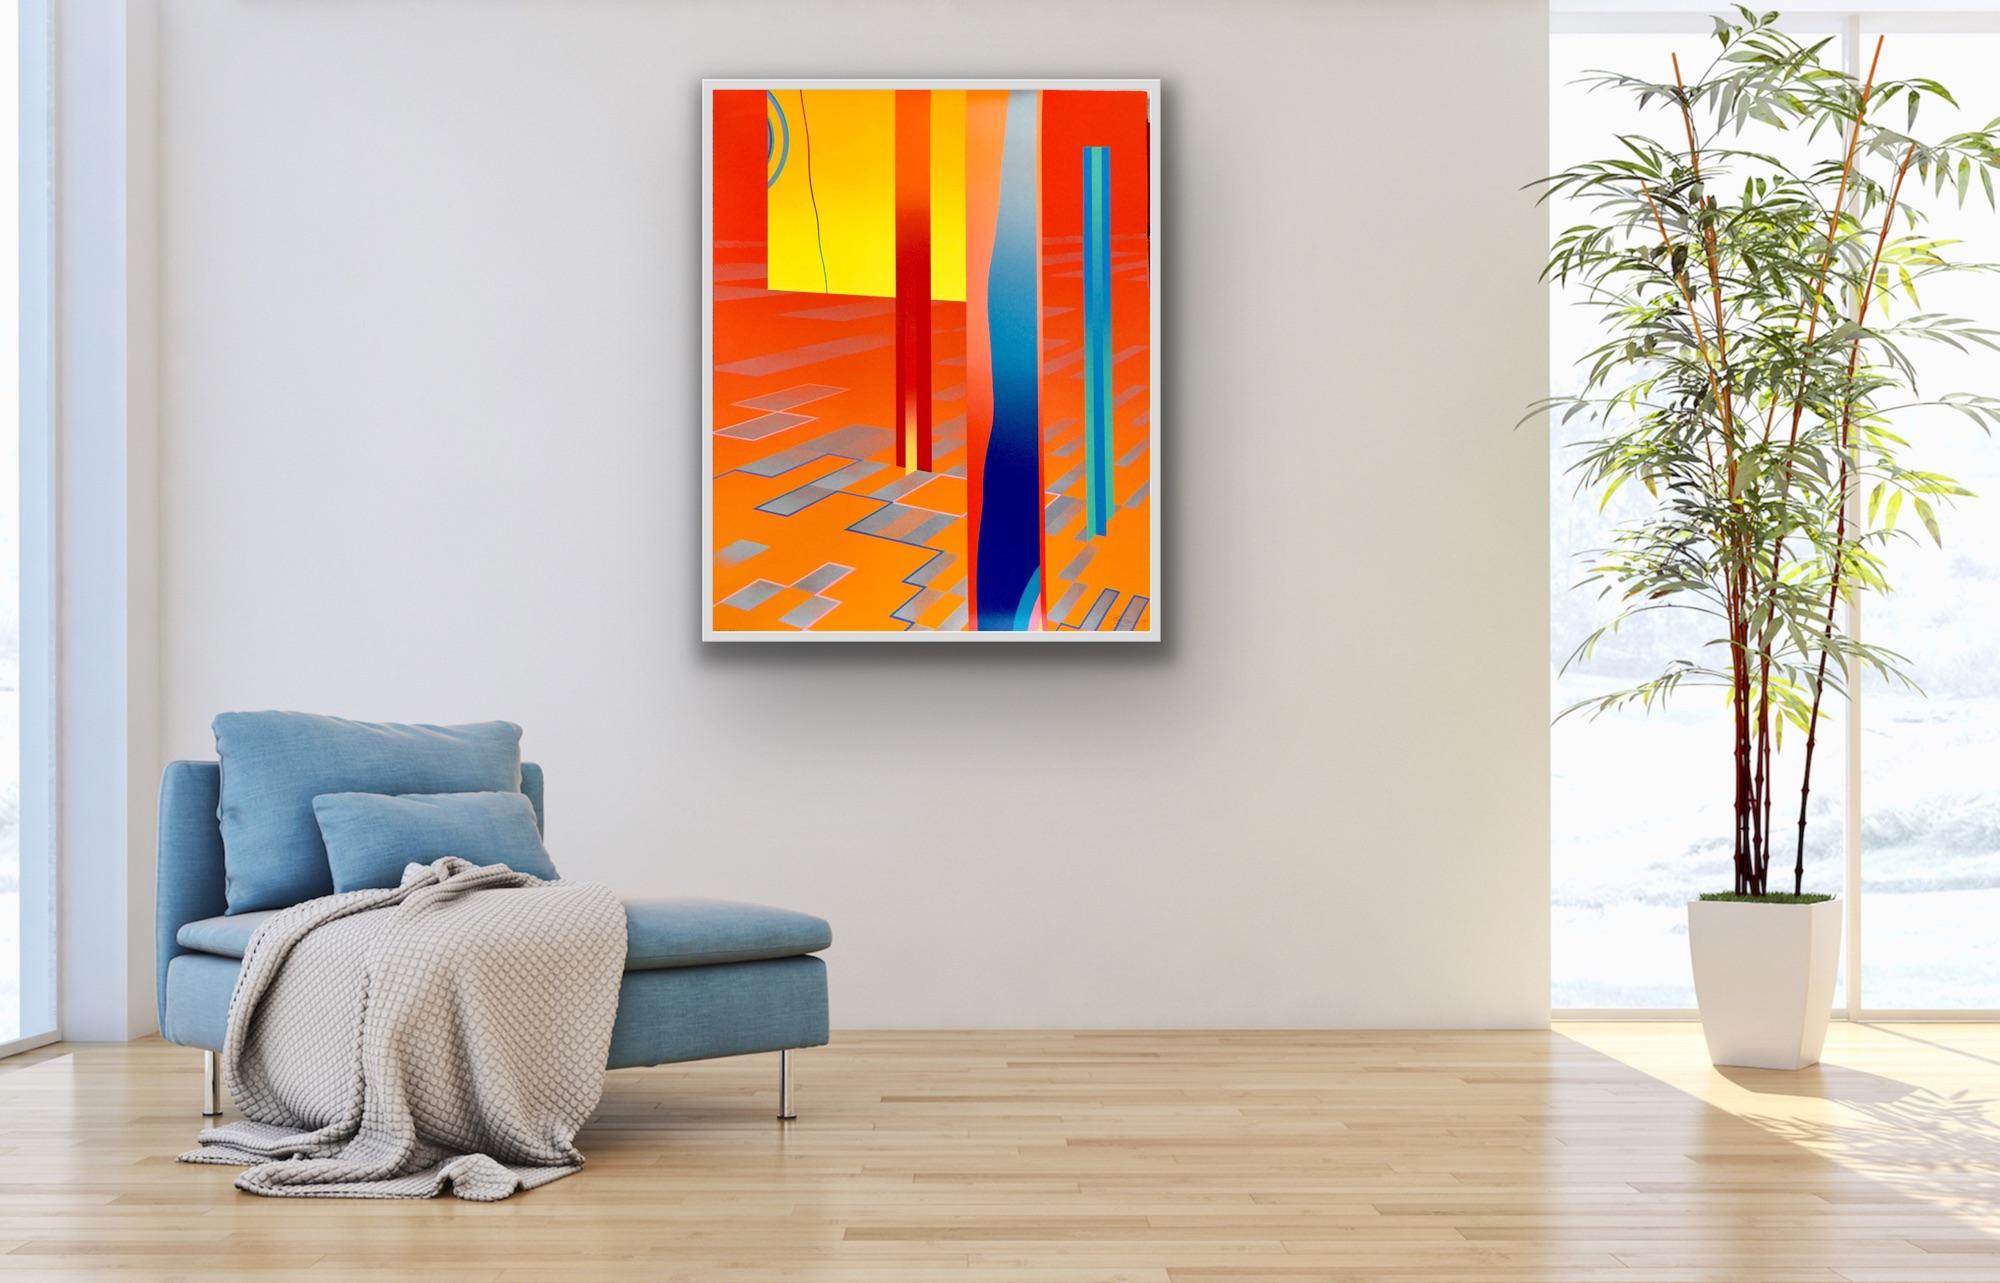 Collectors Limited Edition 1980's warm colourful abstract geometric graphic 3 For Sale 1